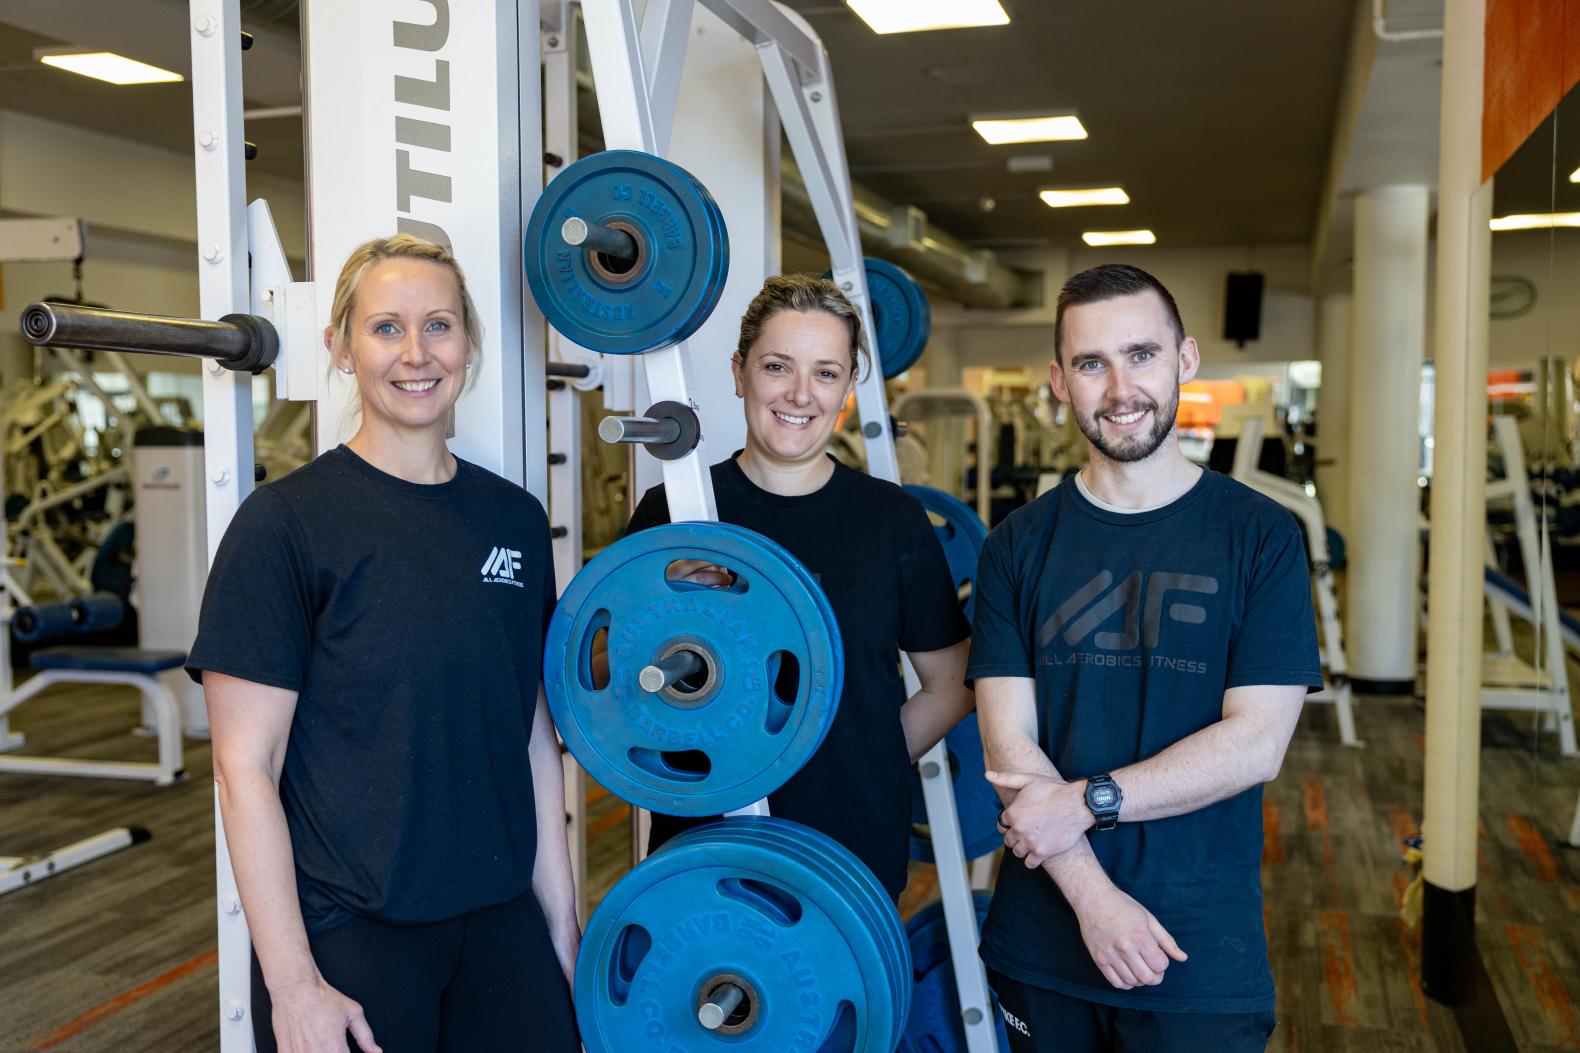 Meet our Personal Training Team